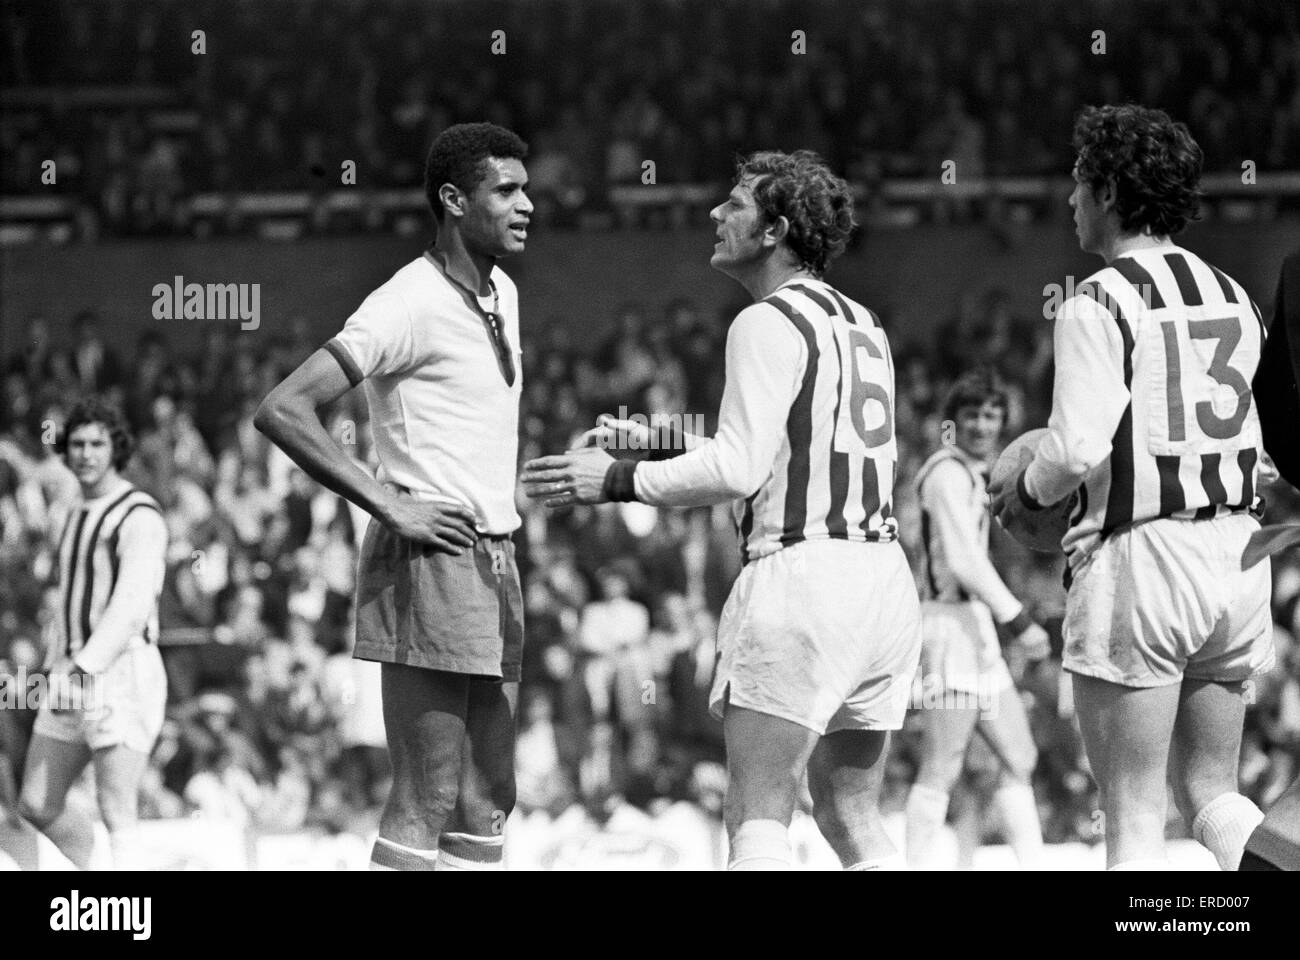 Anglo Italian Tournament at the Hawthorns, West Bromwich Albion v Cagliari. John Kaye making a firm point with an Italian opponent during the match. 29th May 1971. Stock Photo